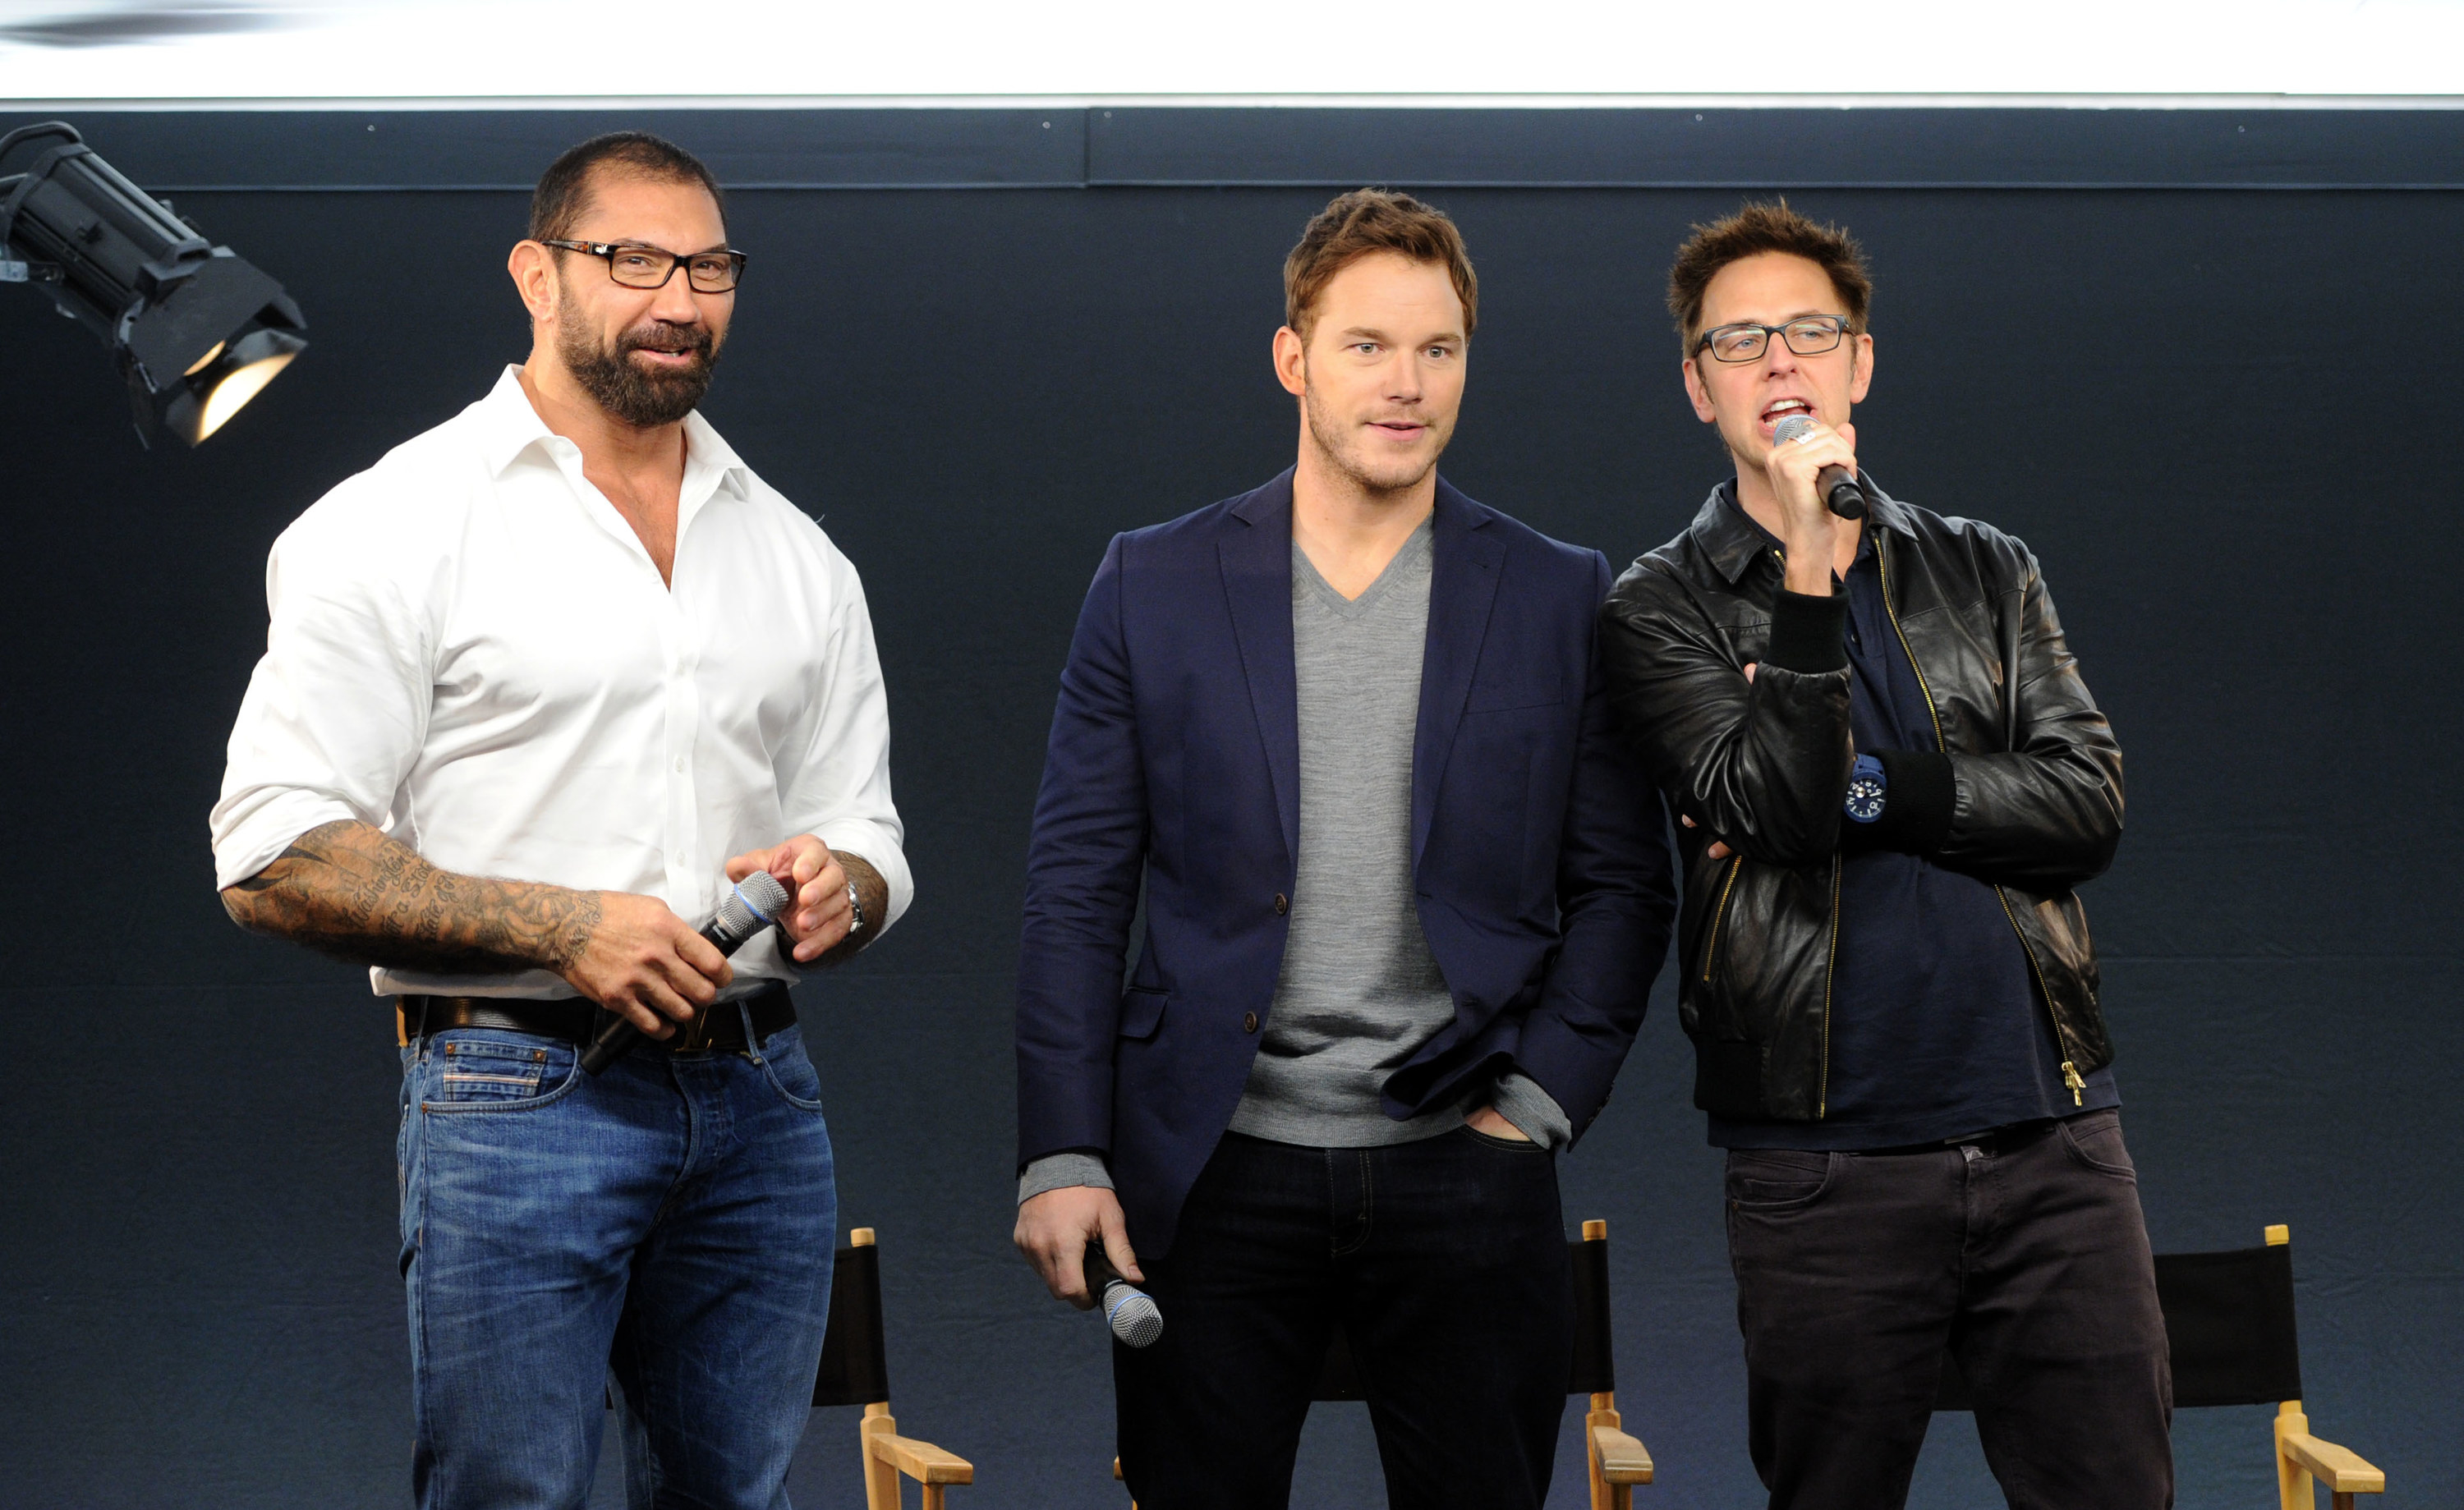 Chris Pratt Once Challenged Dave Bautista to a Wrestling Match